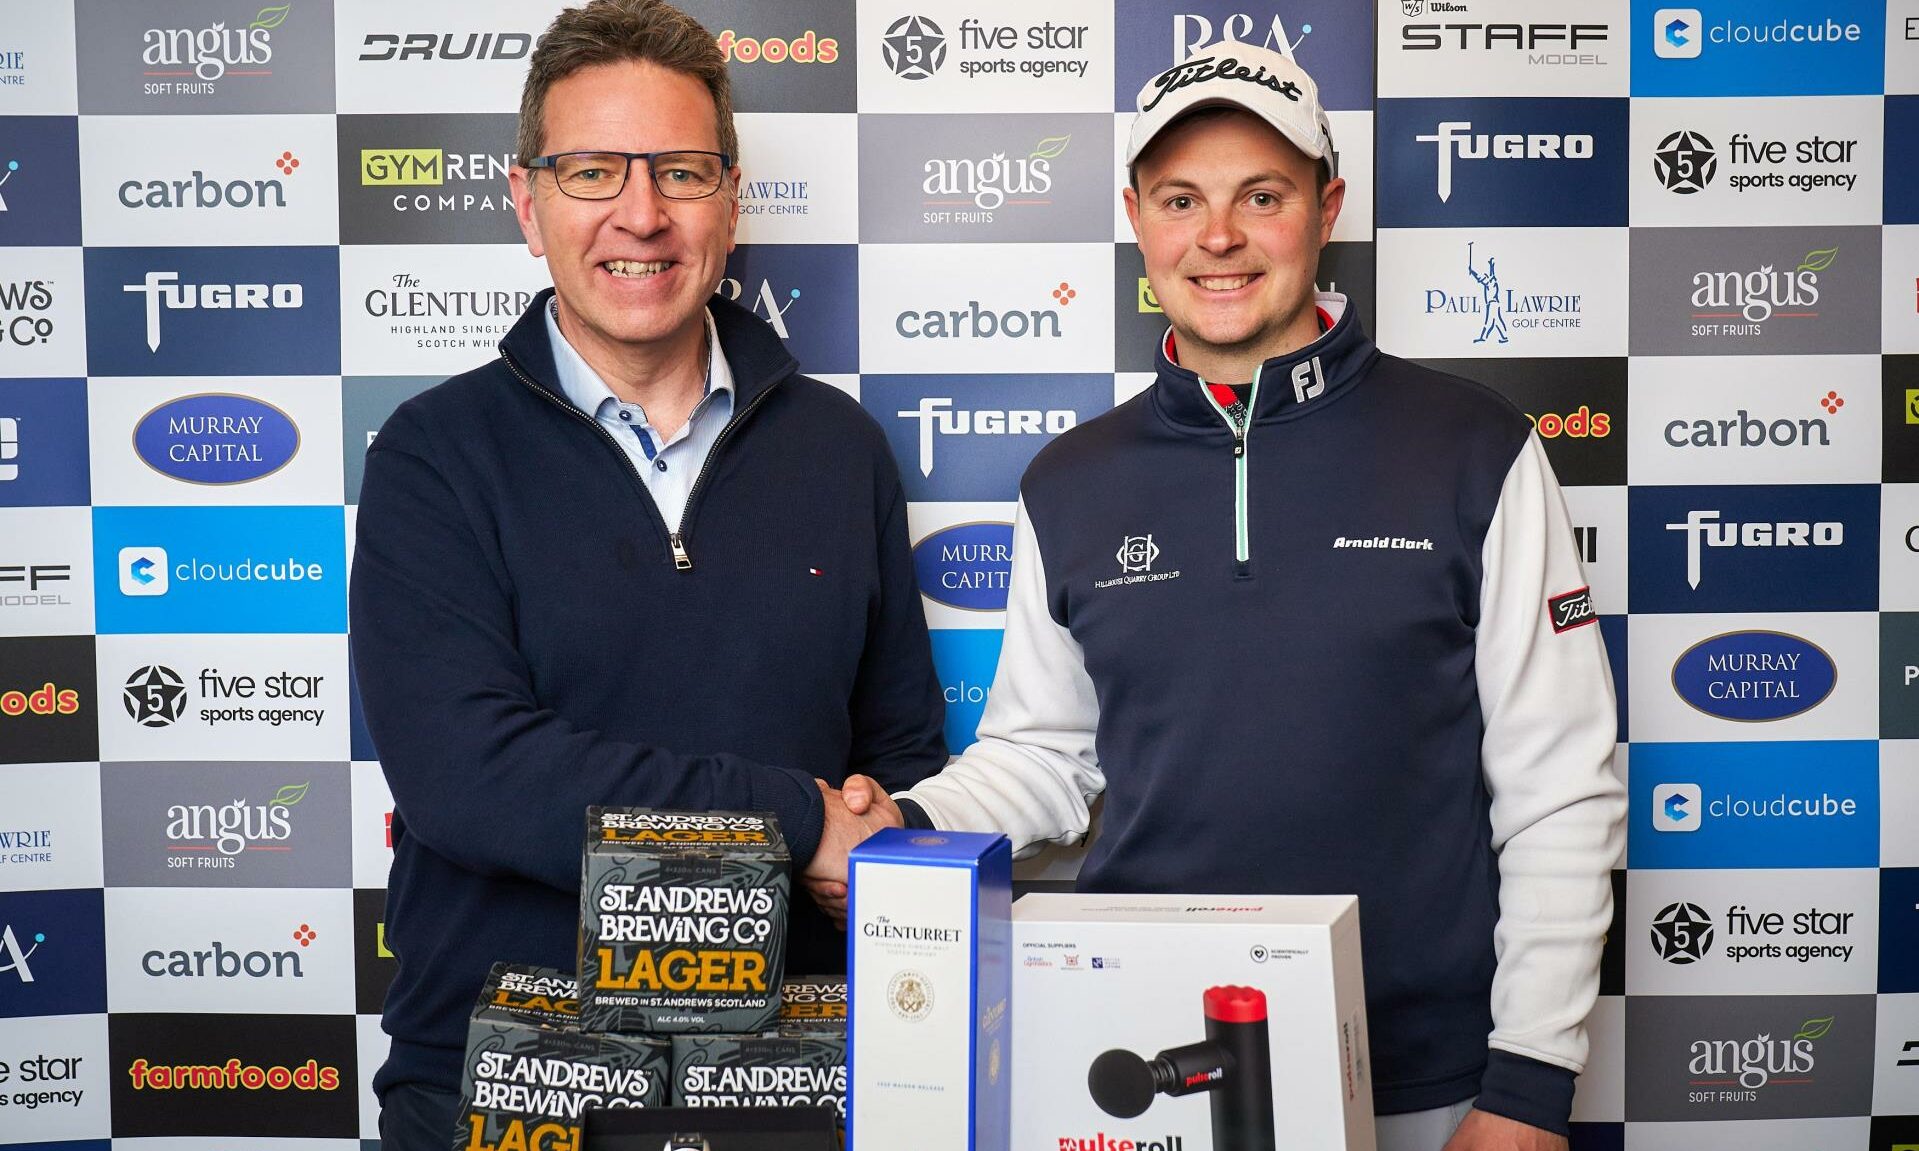 Carbon Financial managing director Gordon Wilson congratulates Jack McDonald on his £4,000 Blairgowrie Perthshire Masters win. Pic Fraser Band Photography